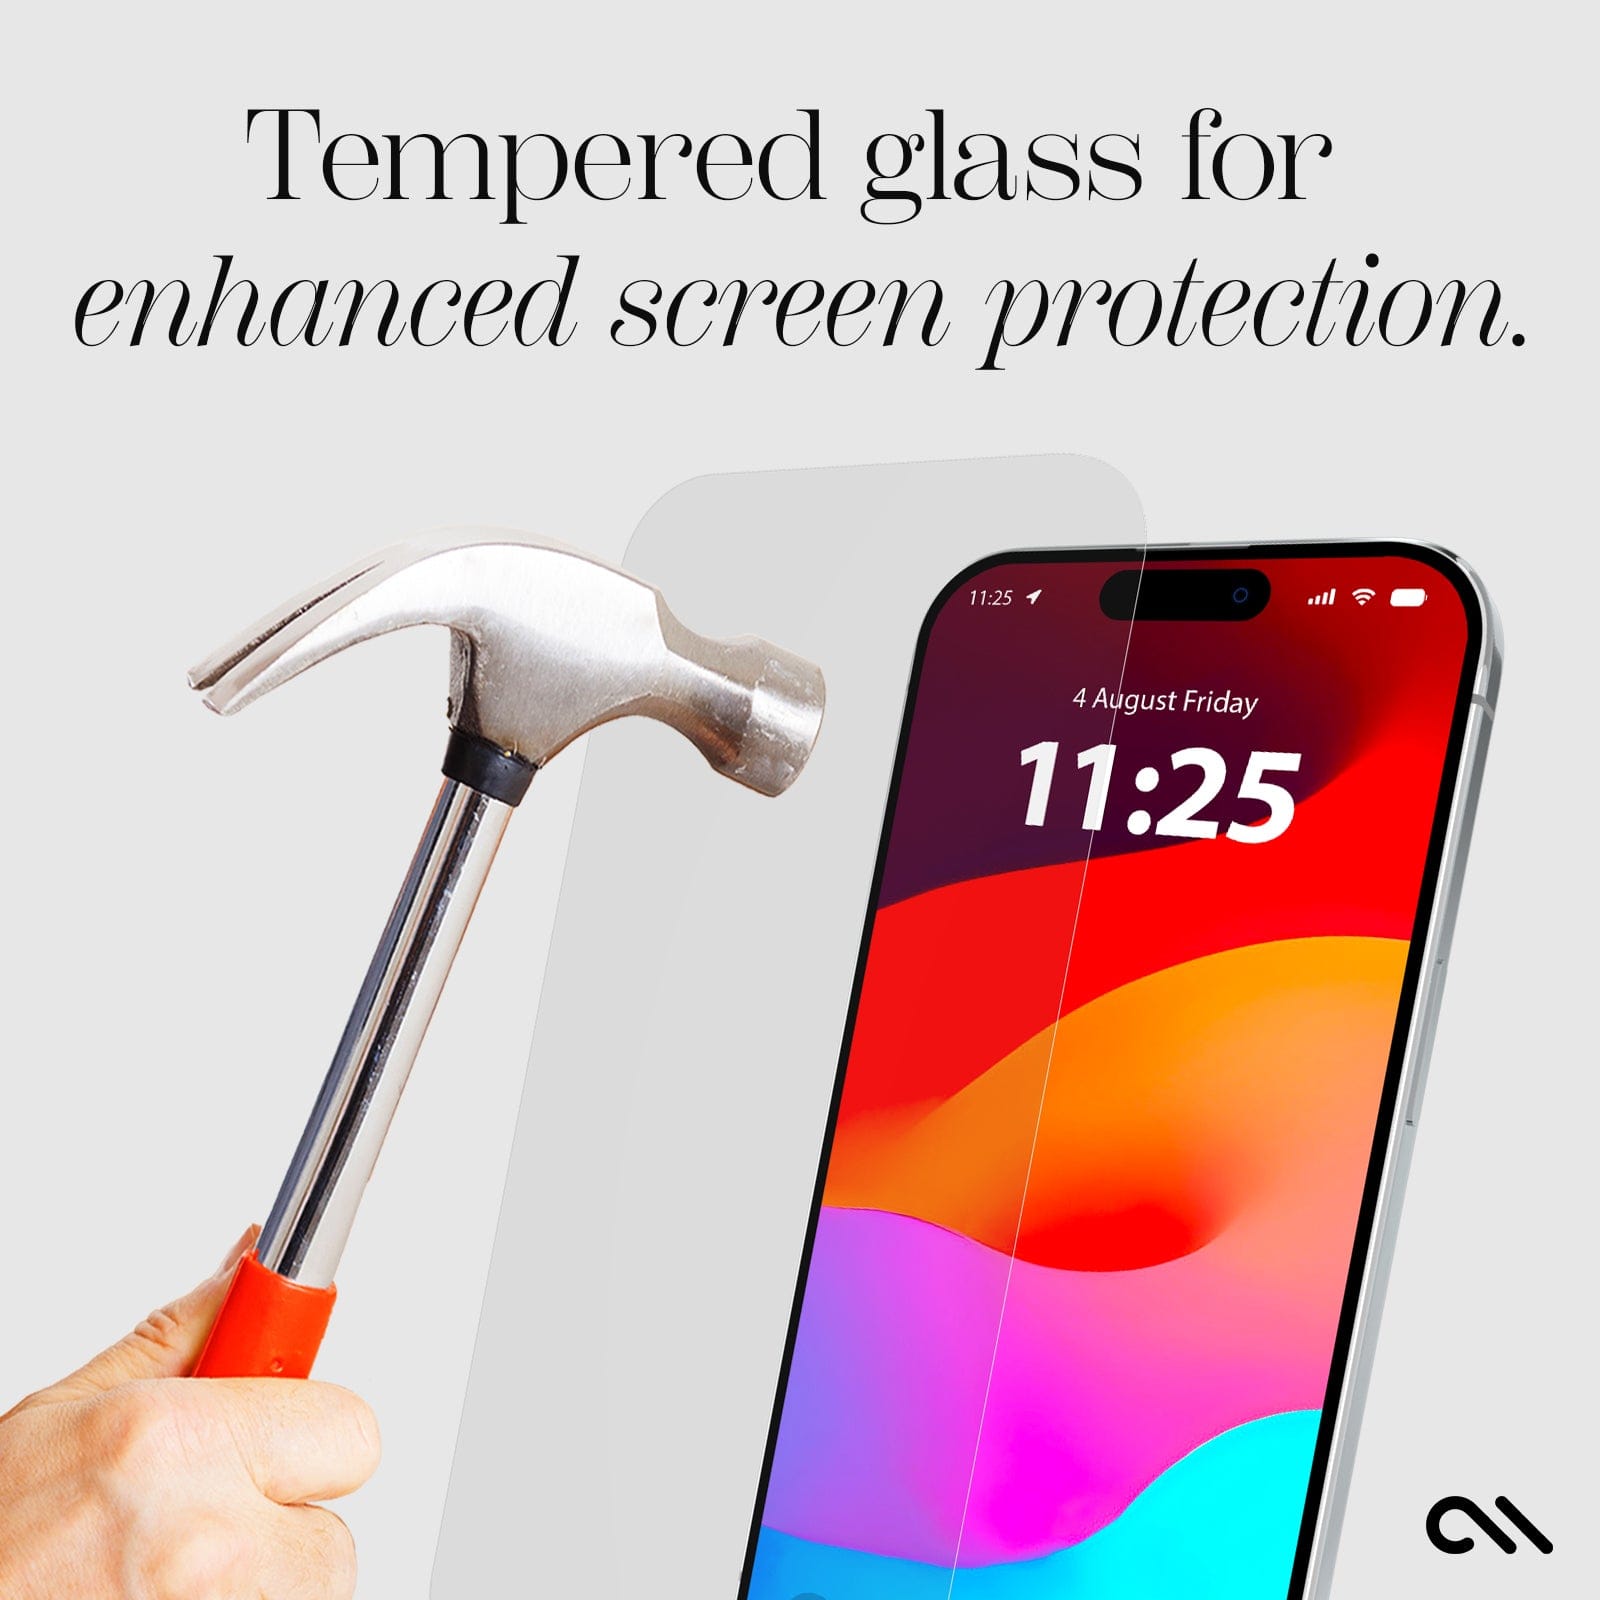 TEMPERED GLASS FOR ENHANCED SCREEN PROTECTION